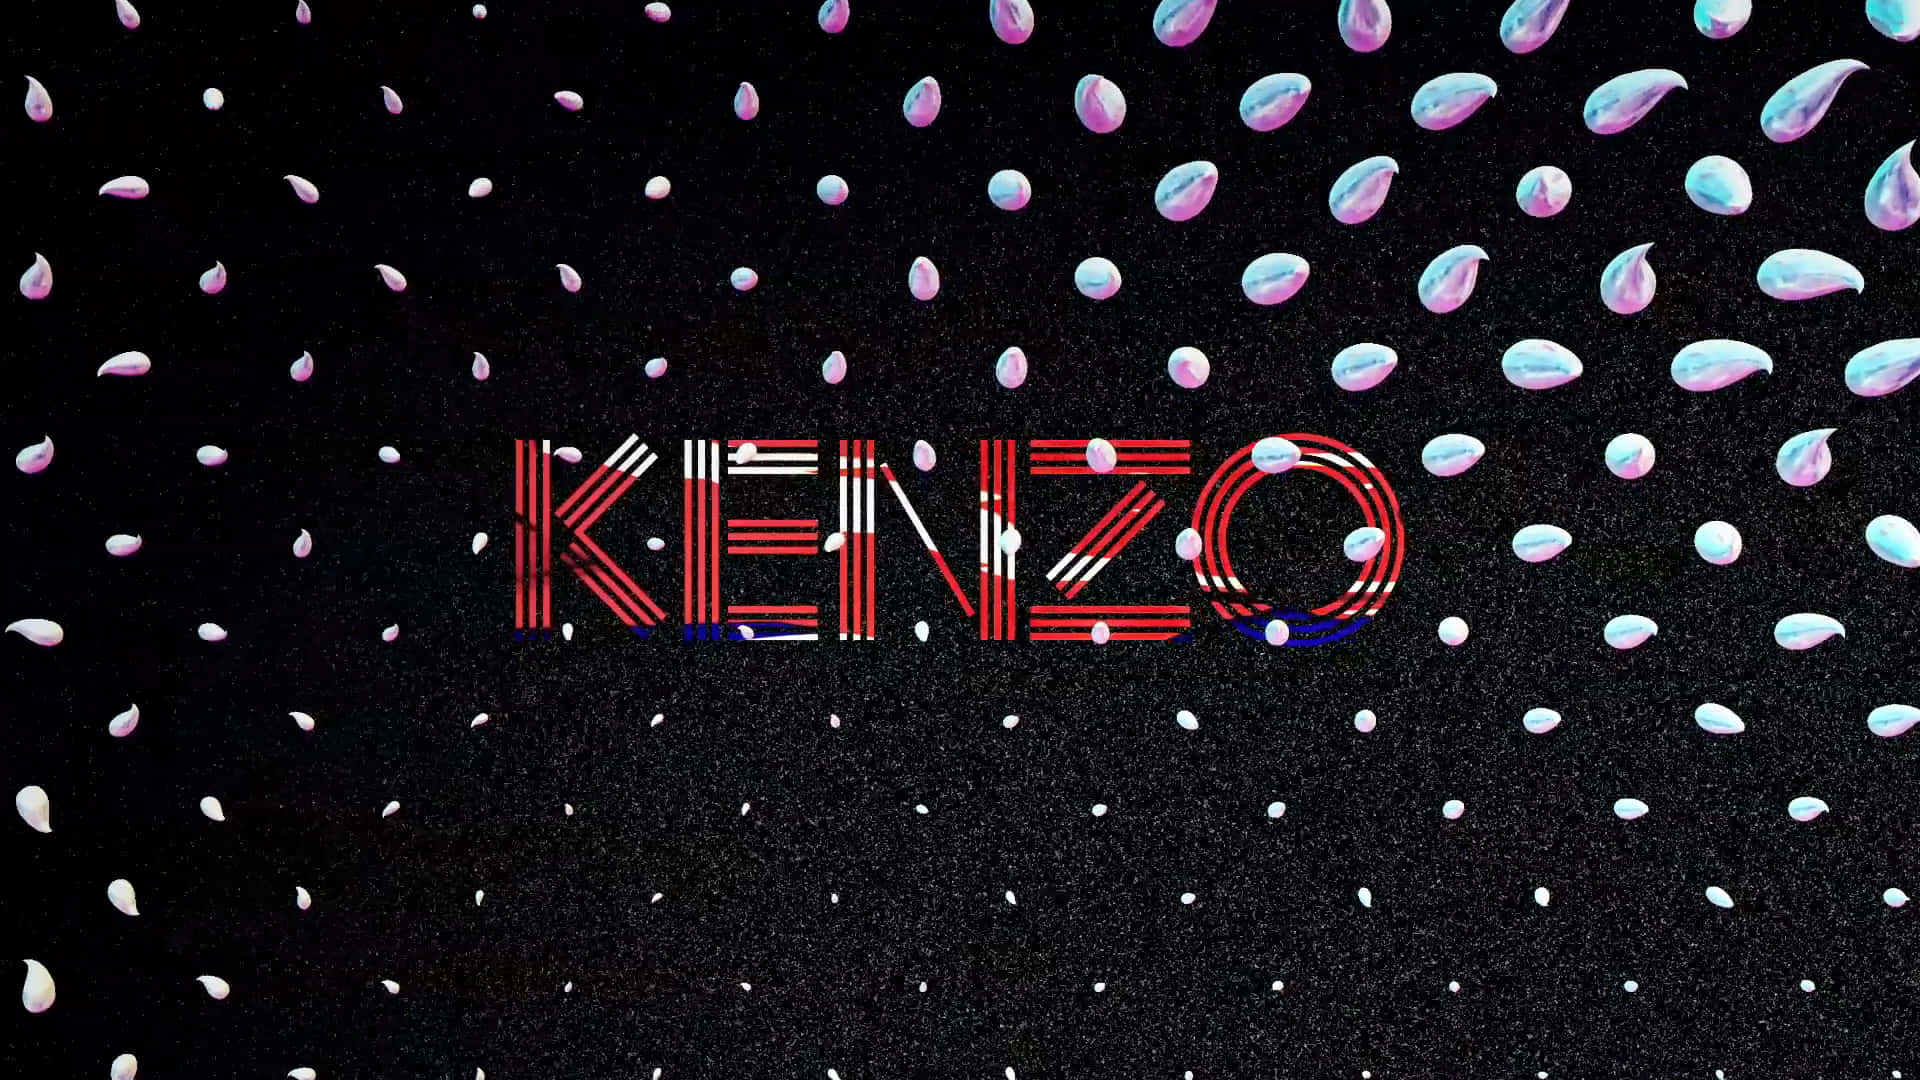 A striking moment from Kenzo's 2012 Men's Collection Wallpaper